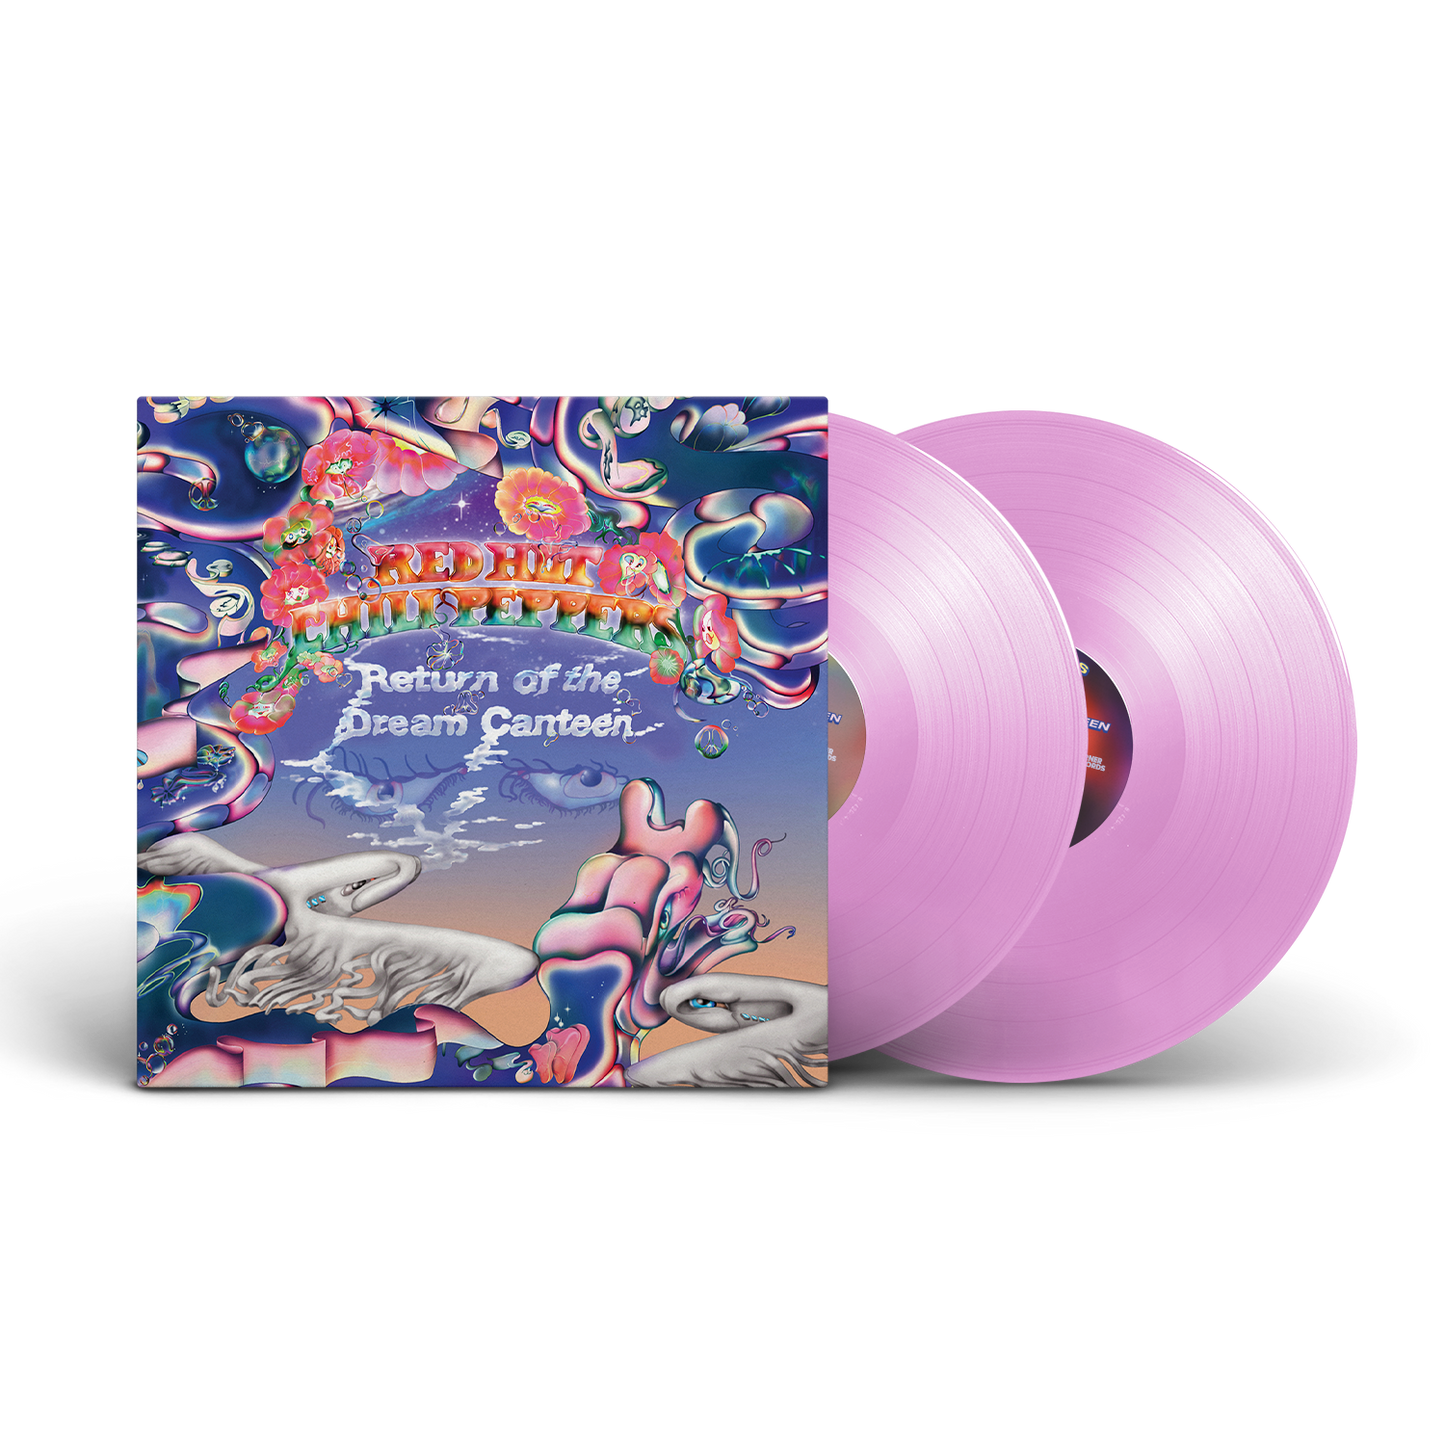 Return of the Dream Canteen - LIMITED VIOLET 2LP